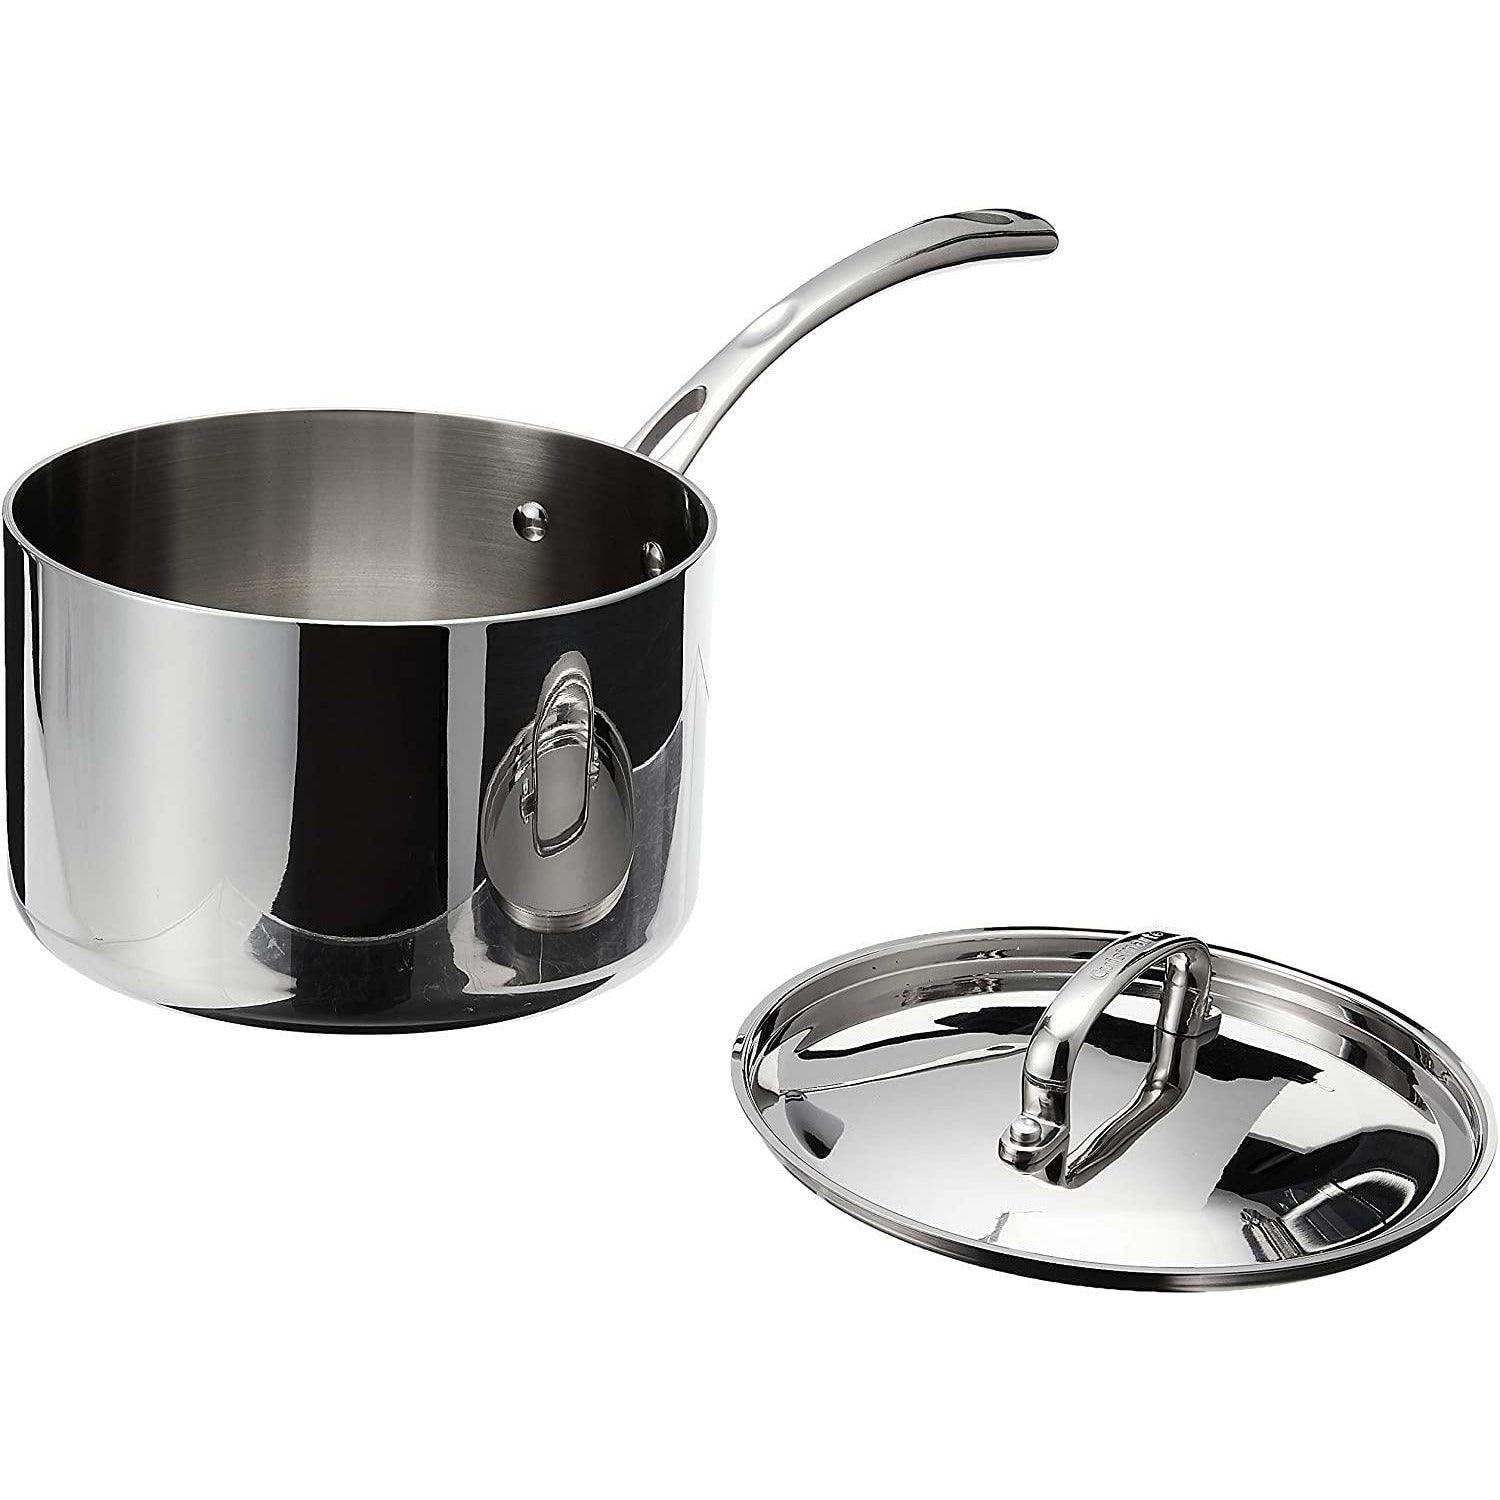 Cuisinart French Classic Tri-Ply Stainless 6 Quart Stockpot with Lid